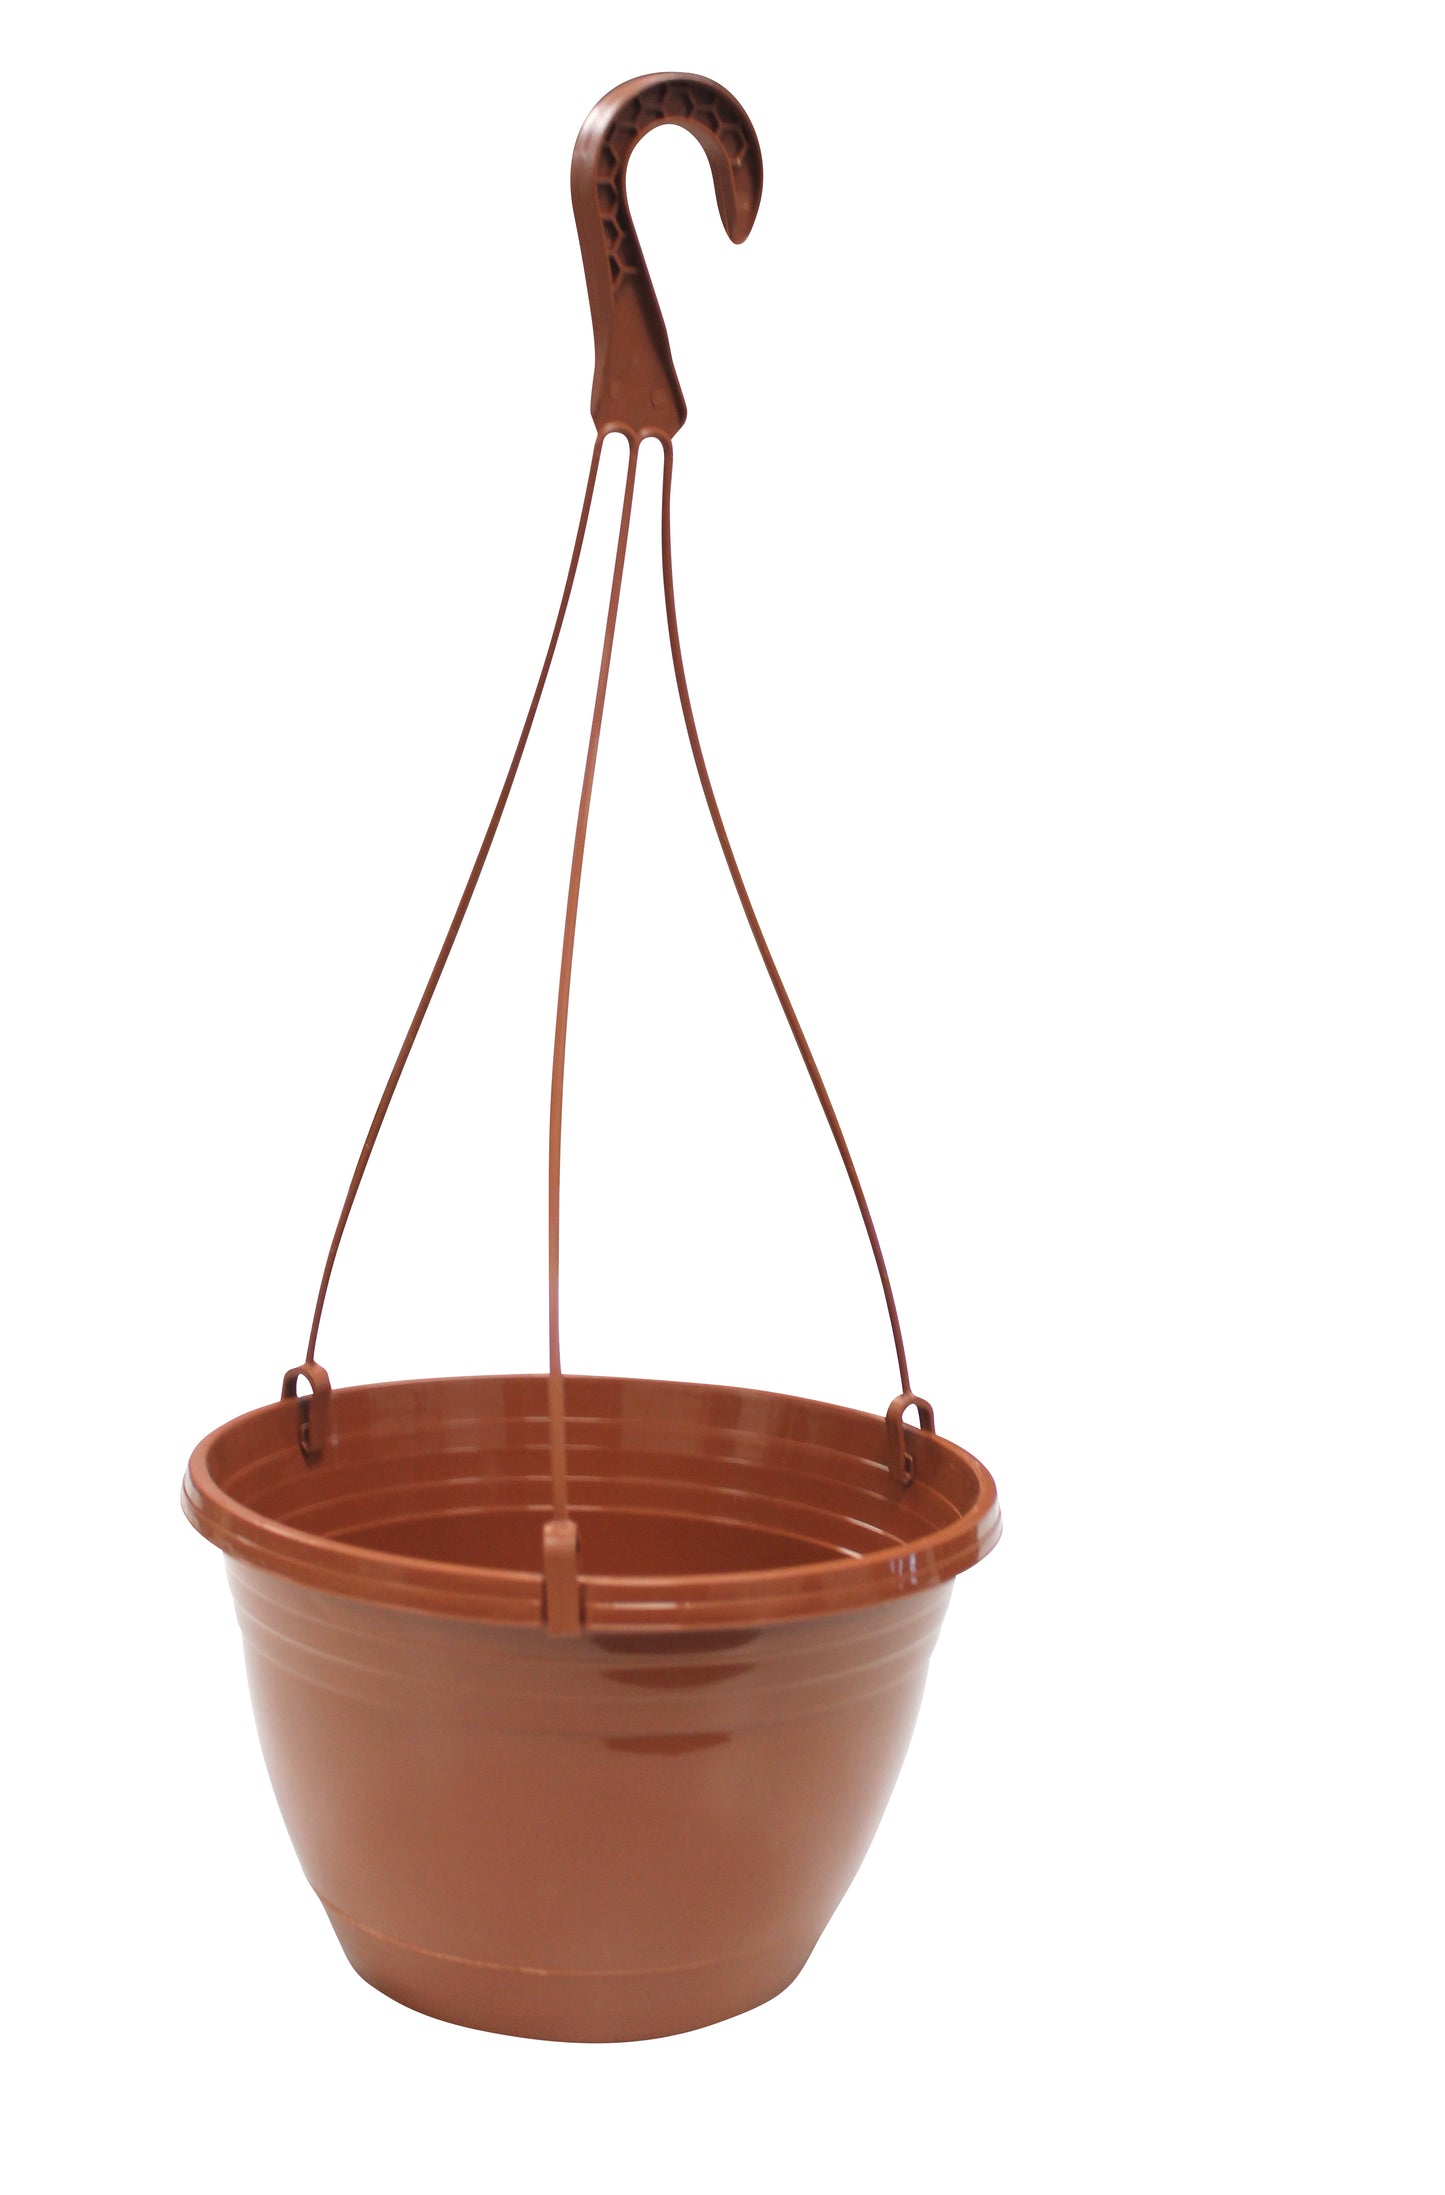 Set of 2 hanging baskets, Green or Terracotta. Made From Recycled Plastics